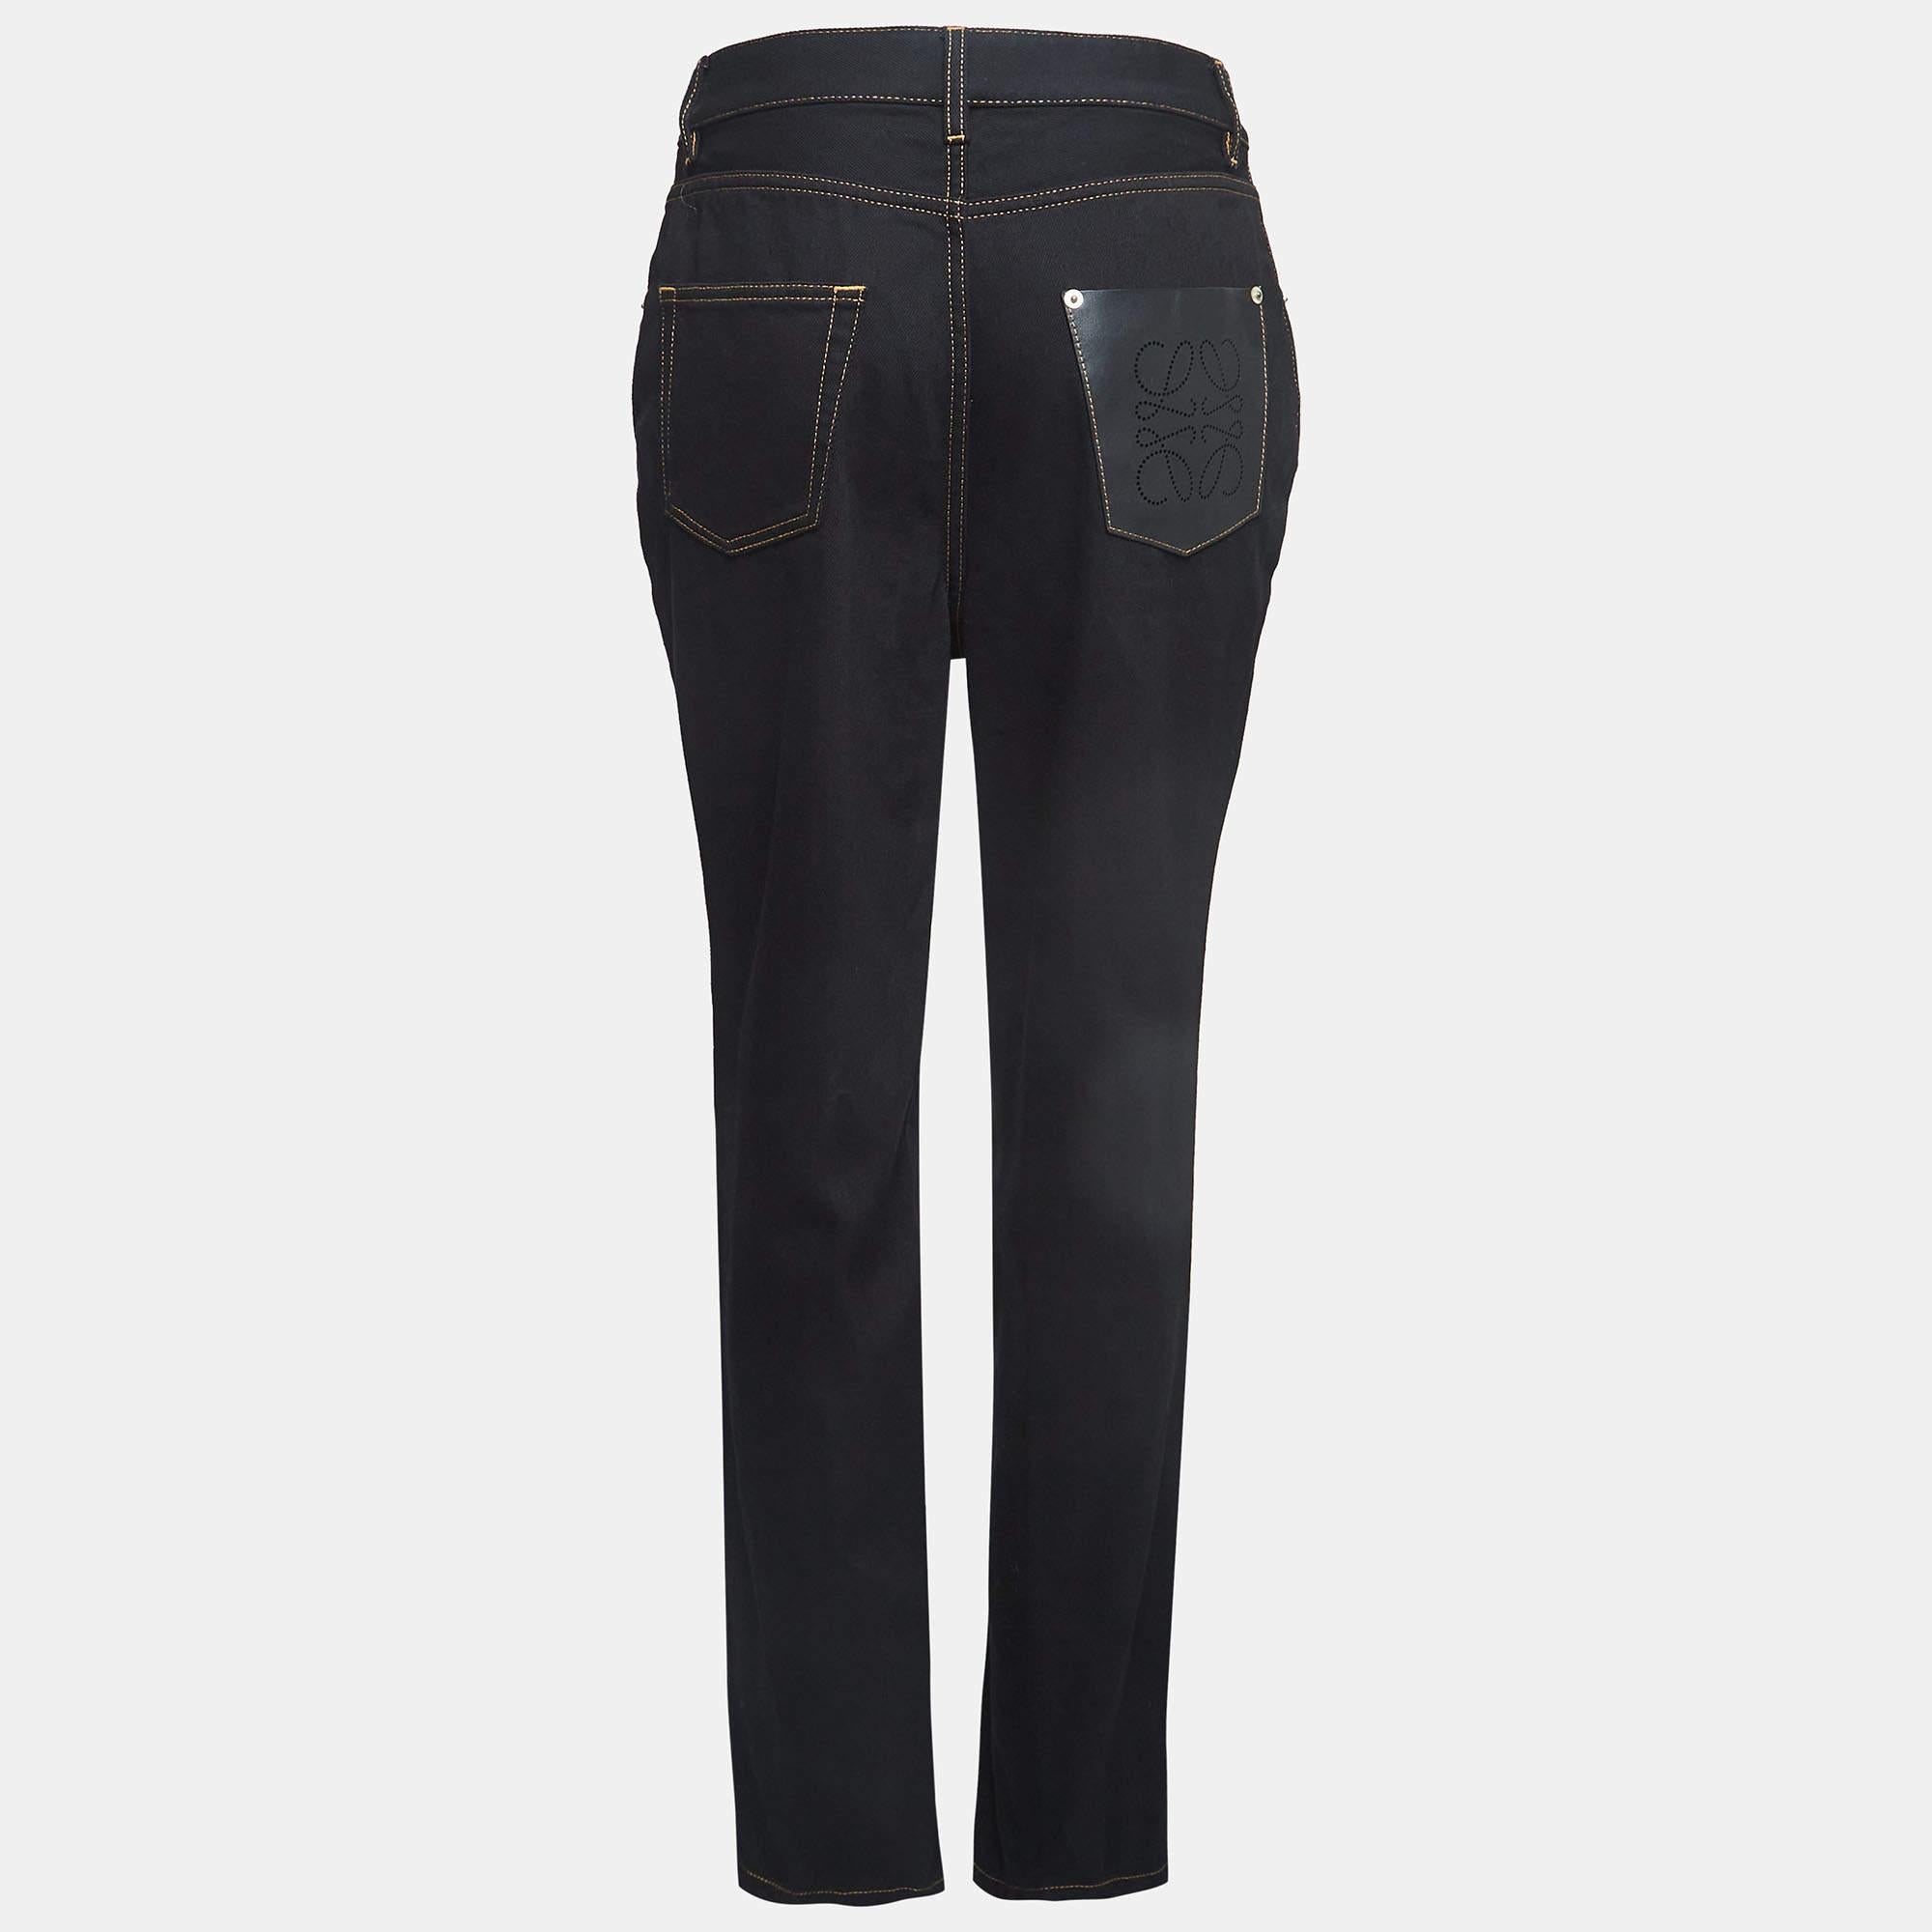 Your wardrobe can never be complete with a great pair of jeans like this. Tailored from best materials, this pair showcases classic detailing, an easy closure style, and pockets. Pair it with your casual t-shirts.

Includes: Tag